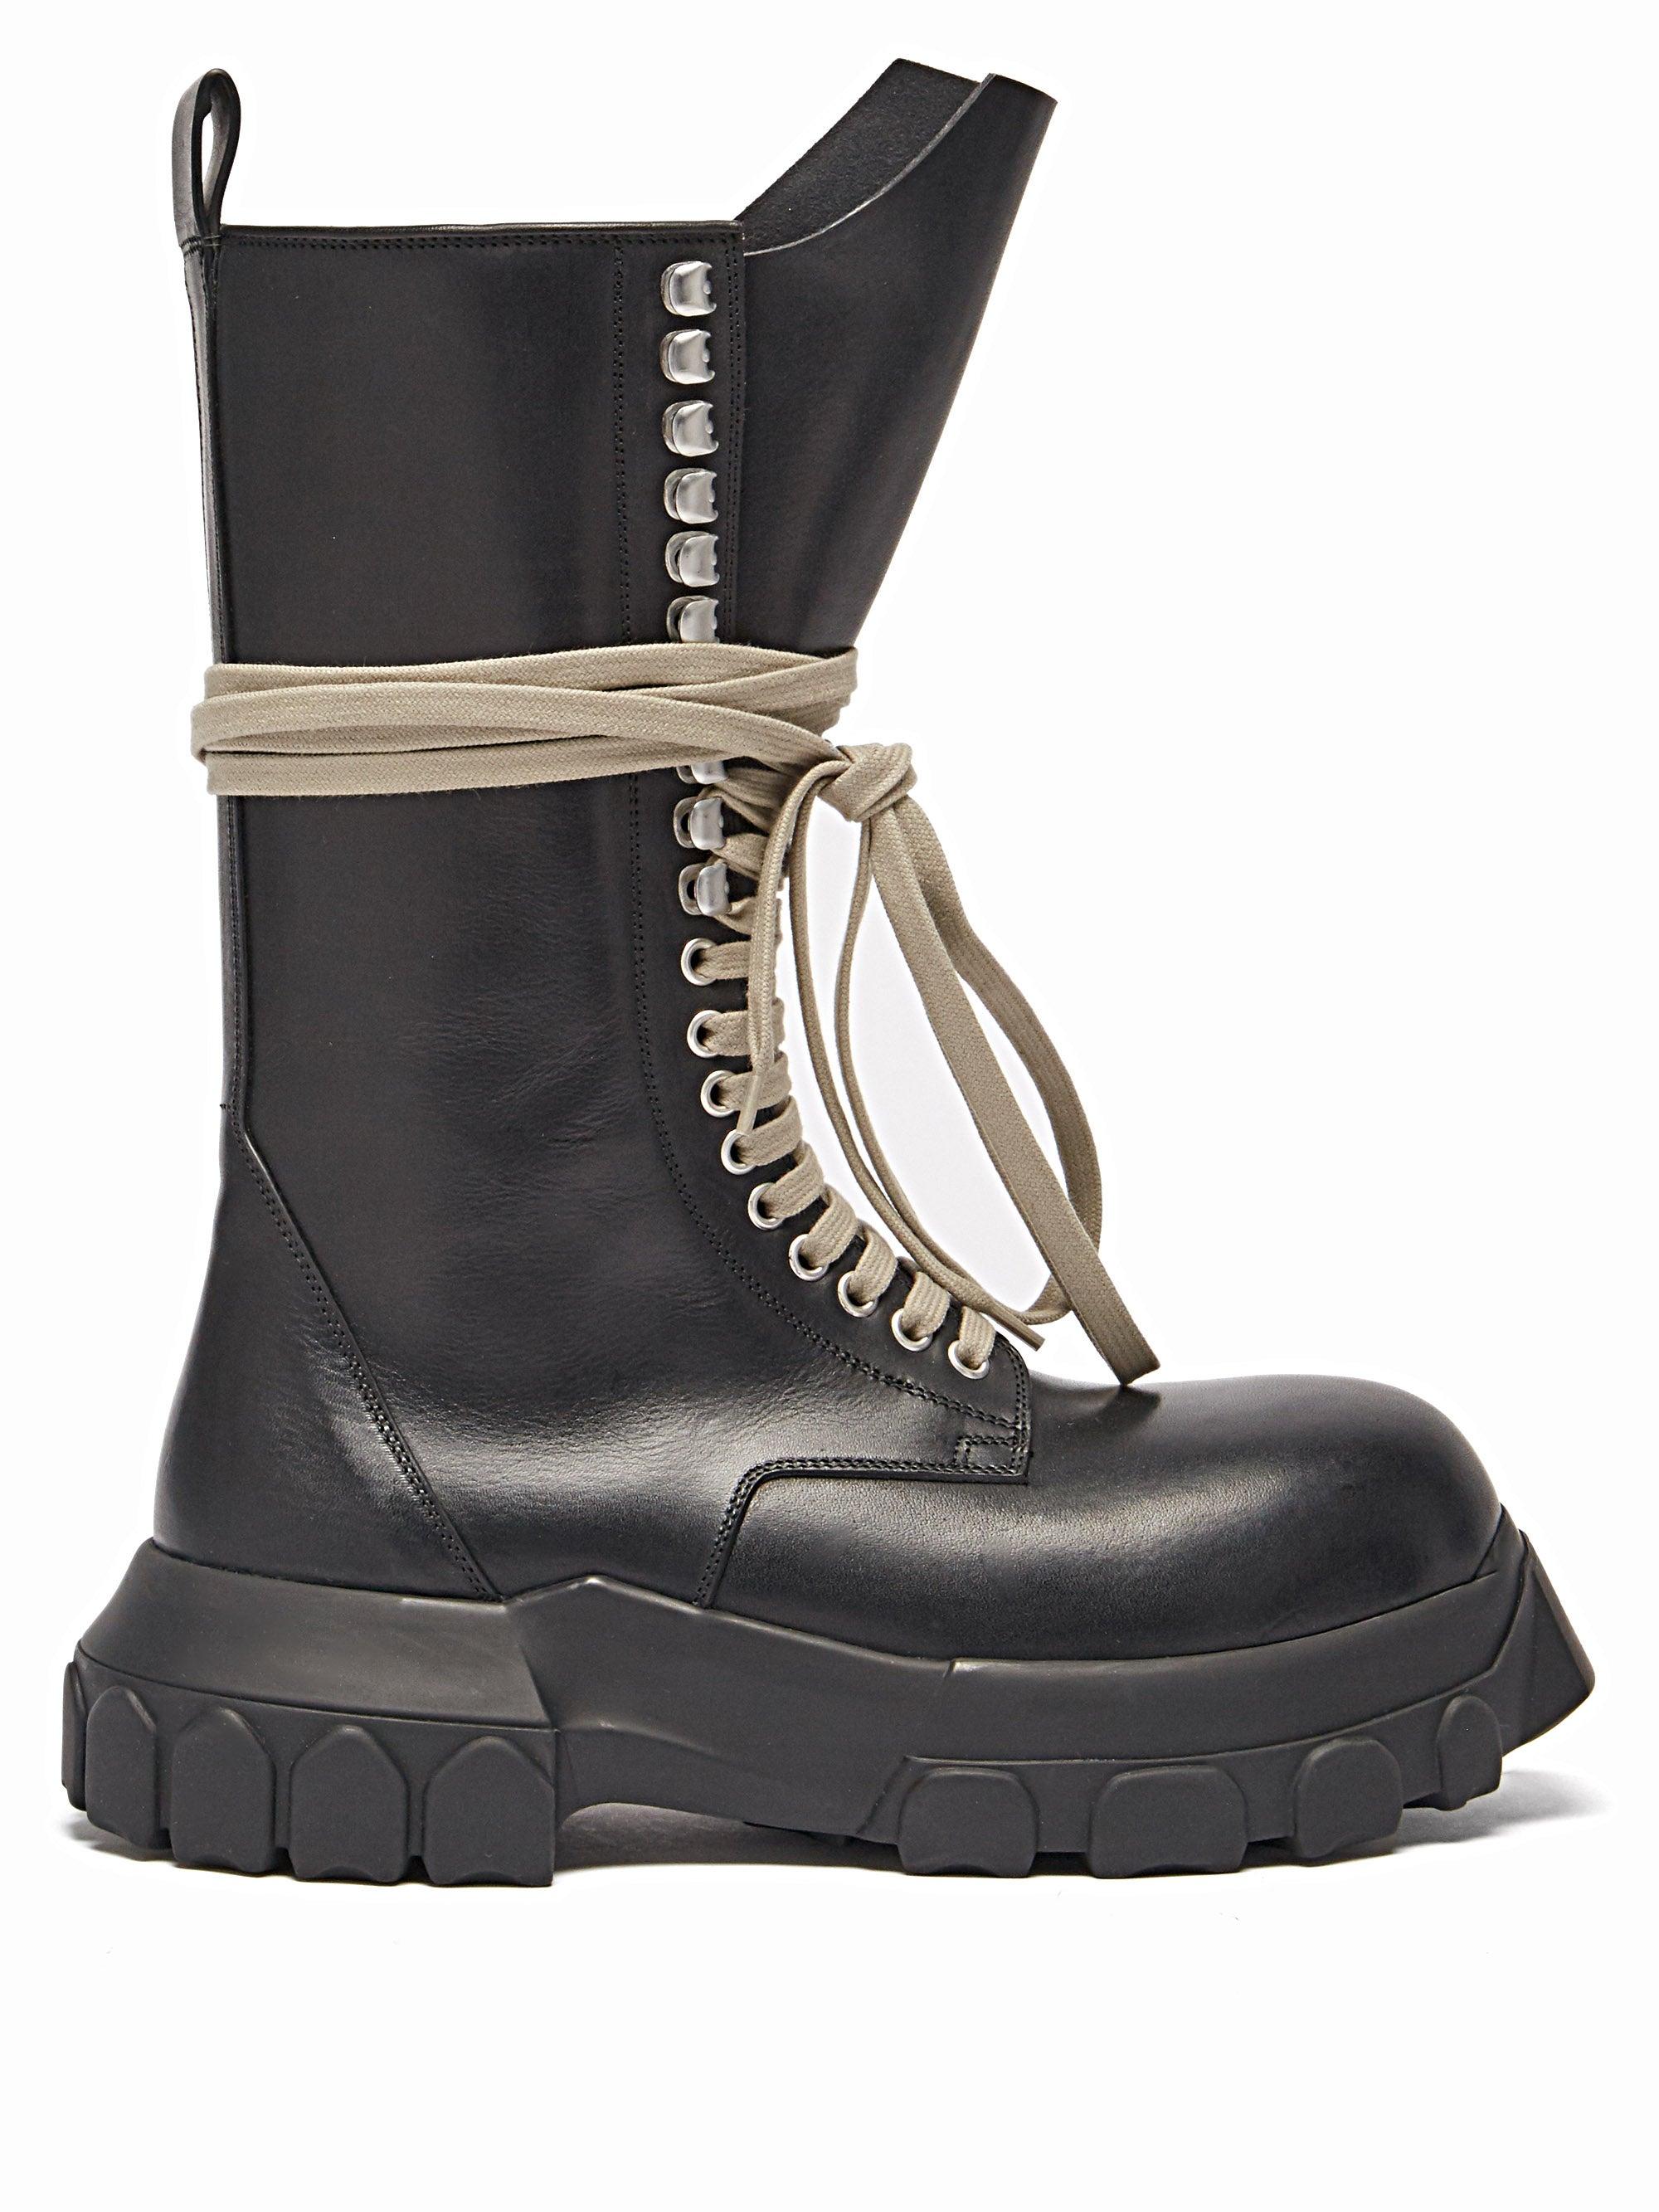 Rick Owens Bozo Tractor Leather Calf-high Boots in Black | Lyst